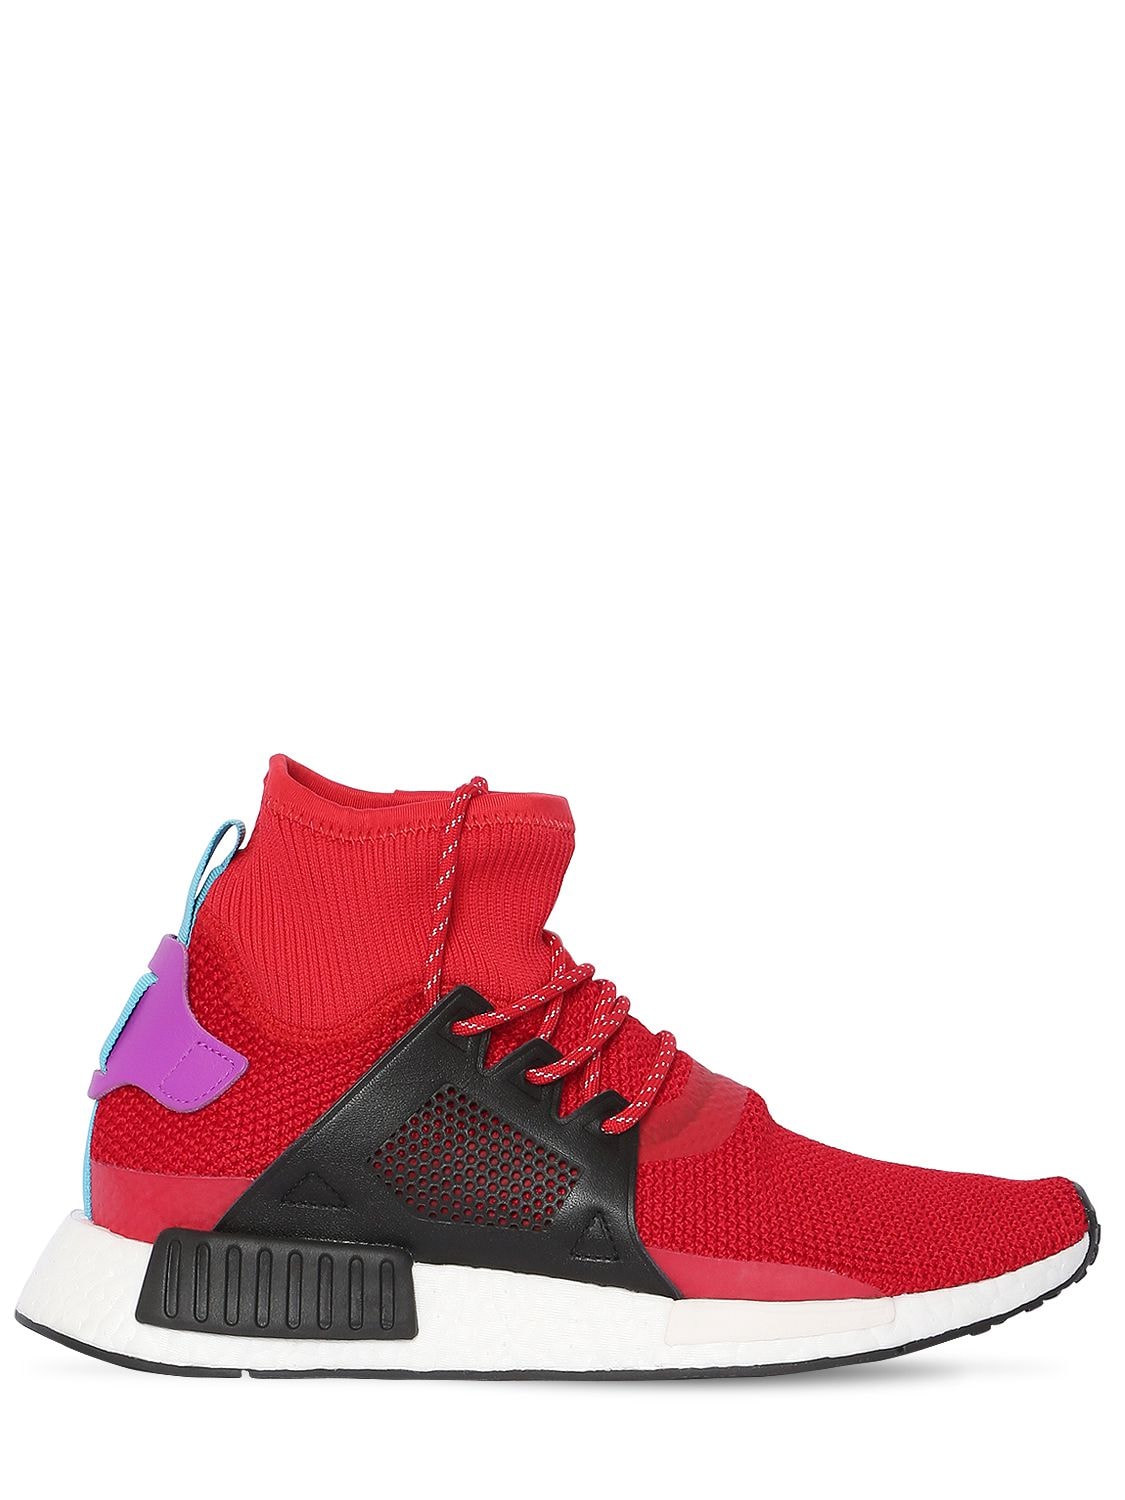 nmd xr1 red